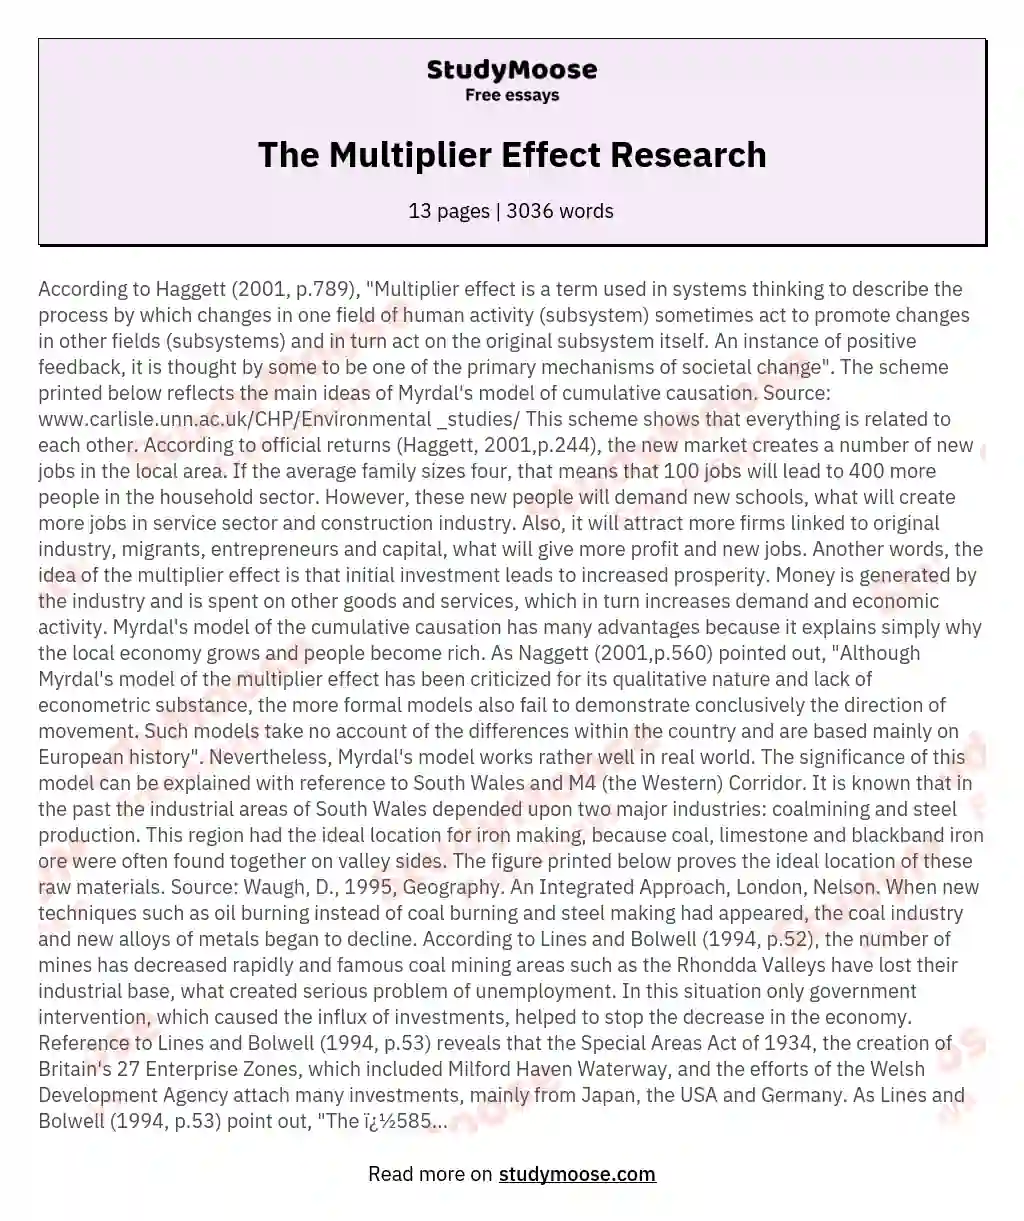 The Multiplier Effect Research essay